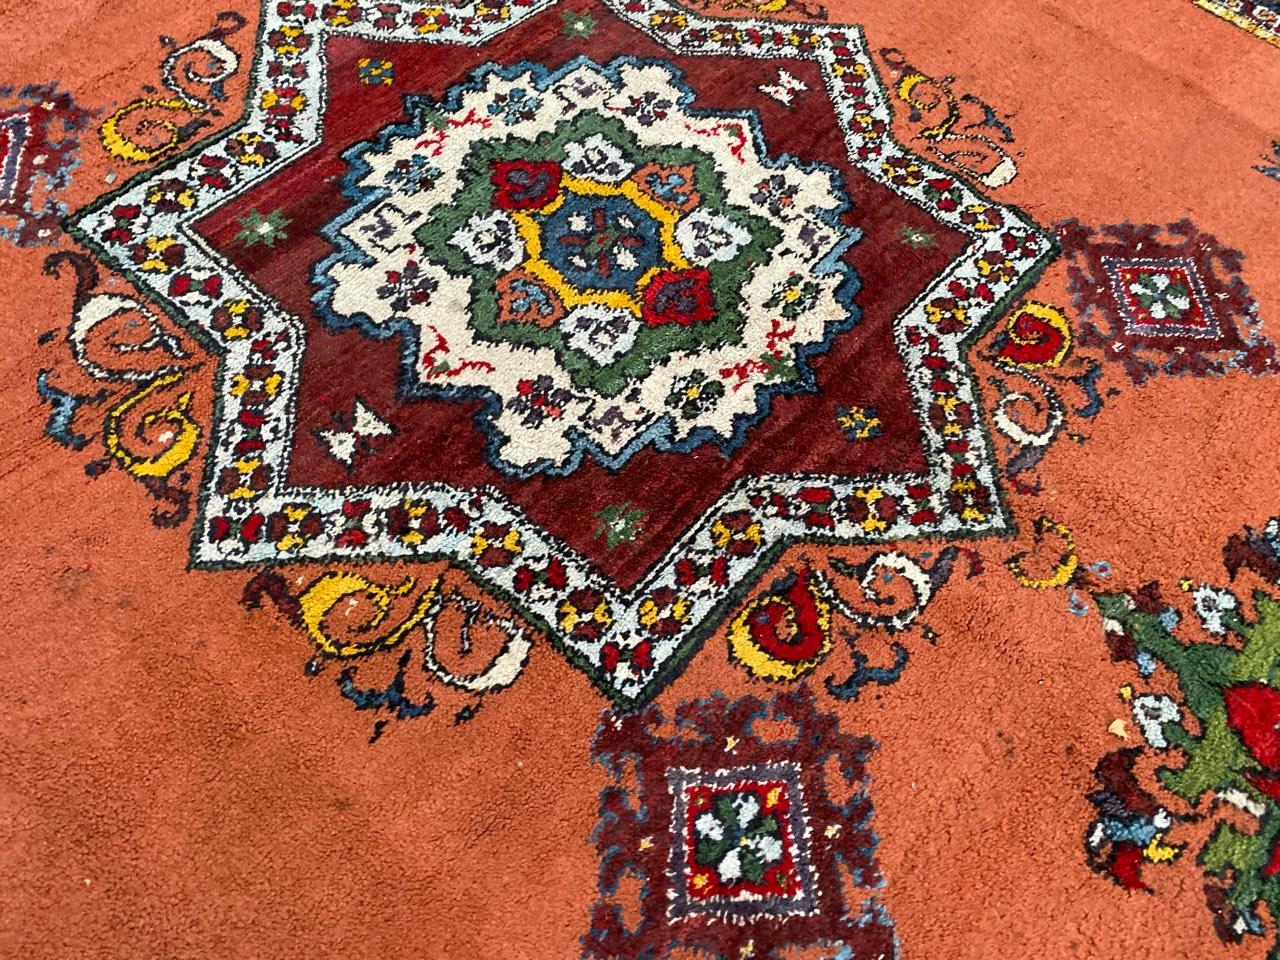 Very beautiful Moroccan rug with nice tribal design with a central medallion, and nice colors with orange, red, blue, yellow, green and purple, entirely hand knotted with wool velvet on wool foundation.